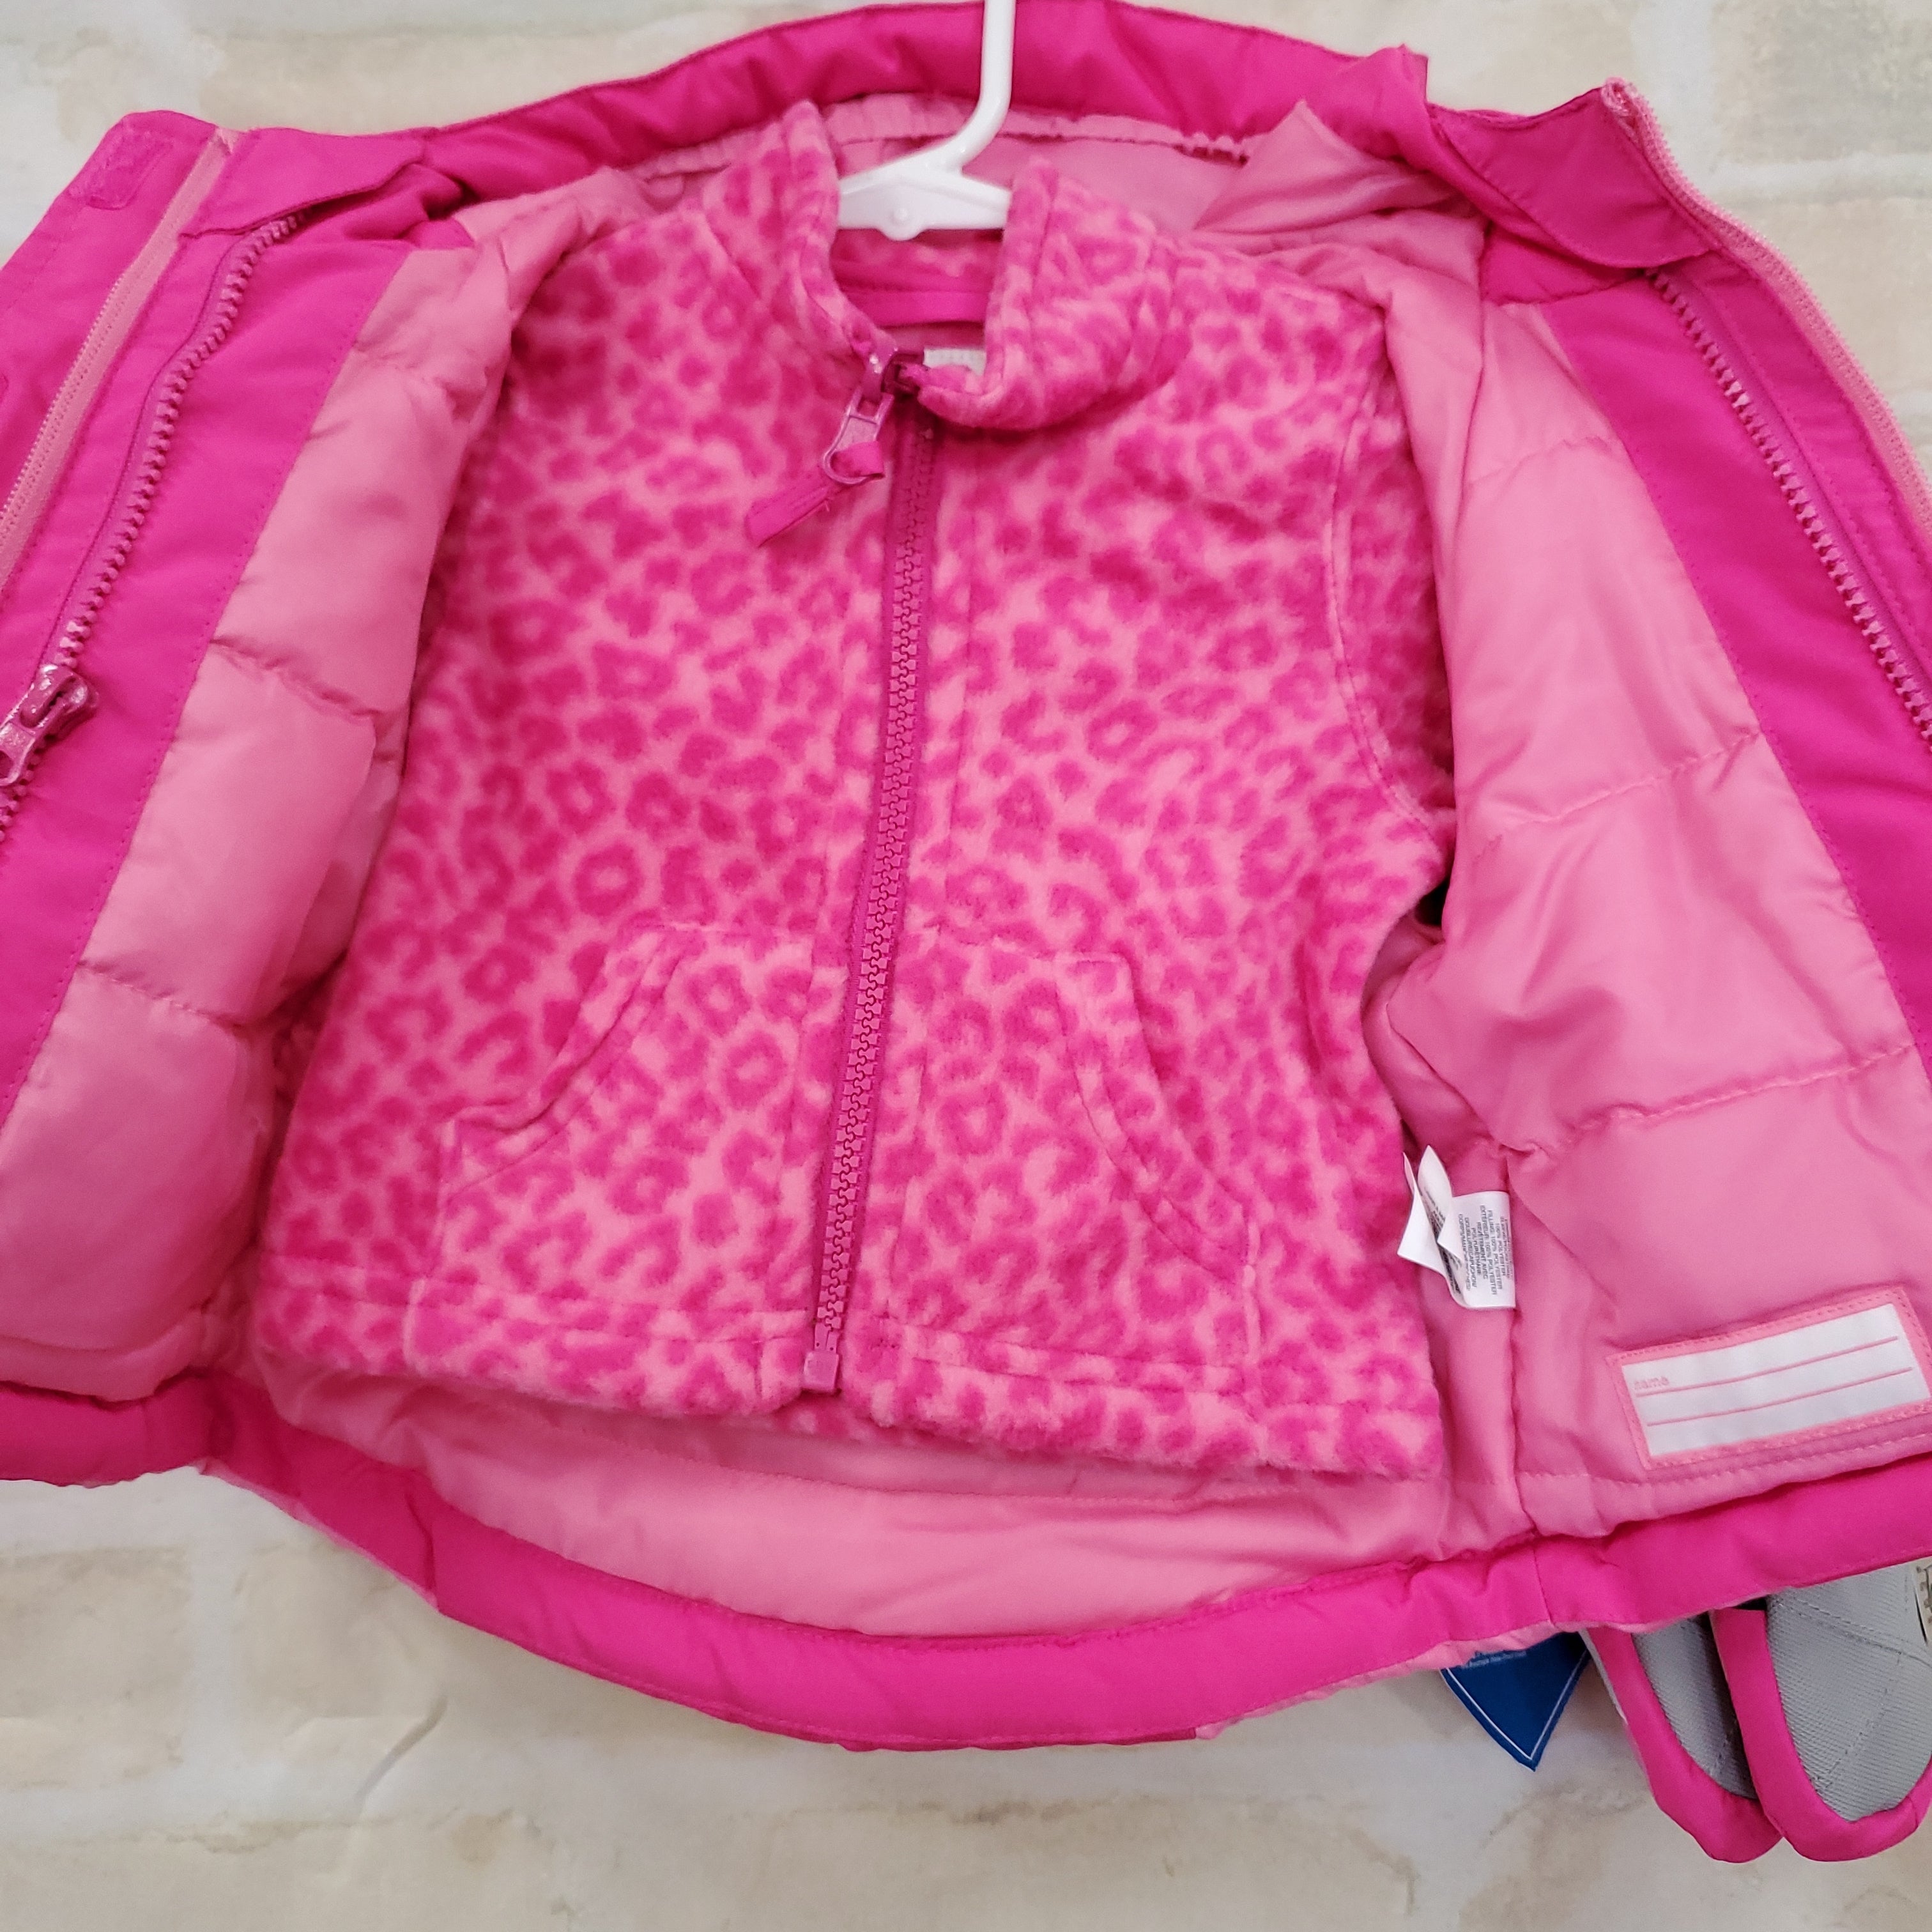 Childrens Place girls coat New pink 3pc light removable jacket mittens water resistant coat 6-9m